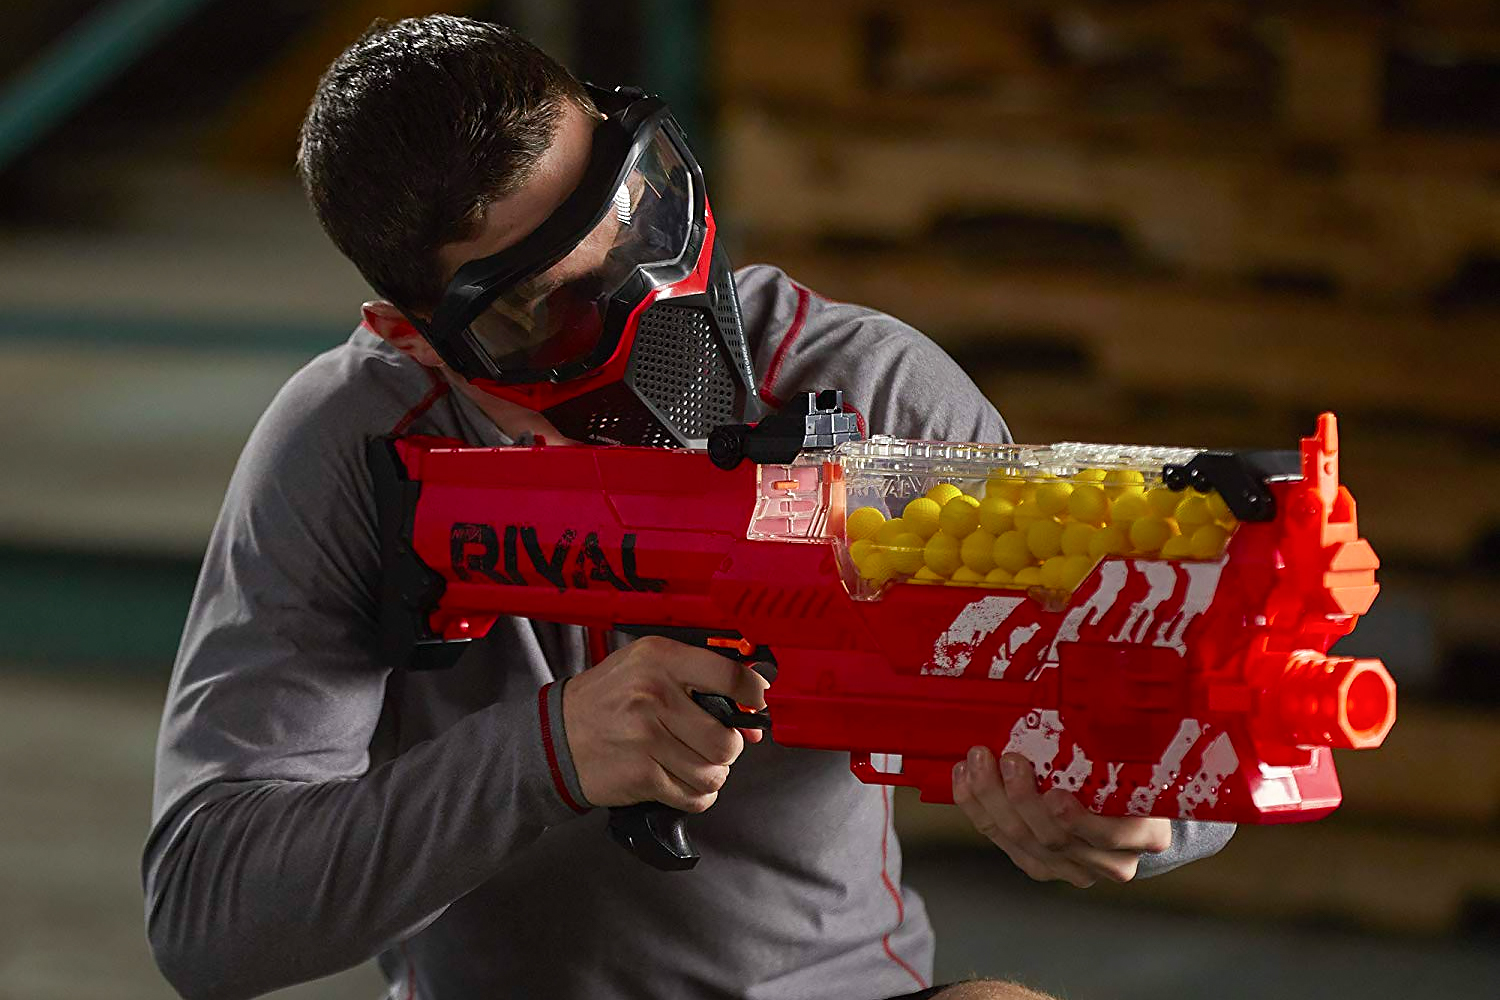 endnu engang Hård ring krone Unleash your inner child with these amusing Nerf guns - The Manual